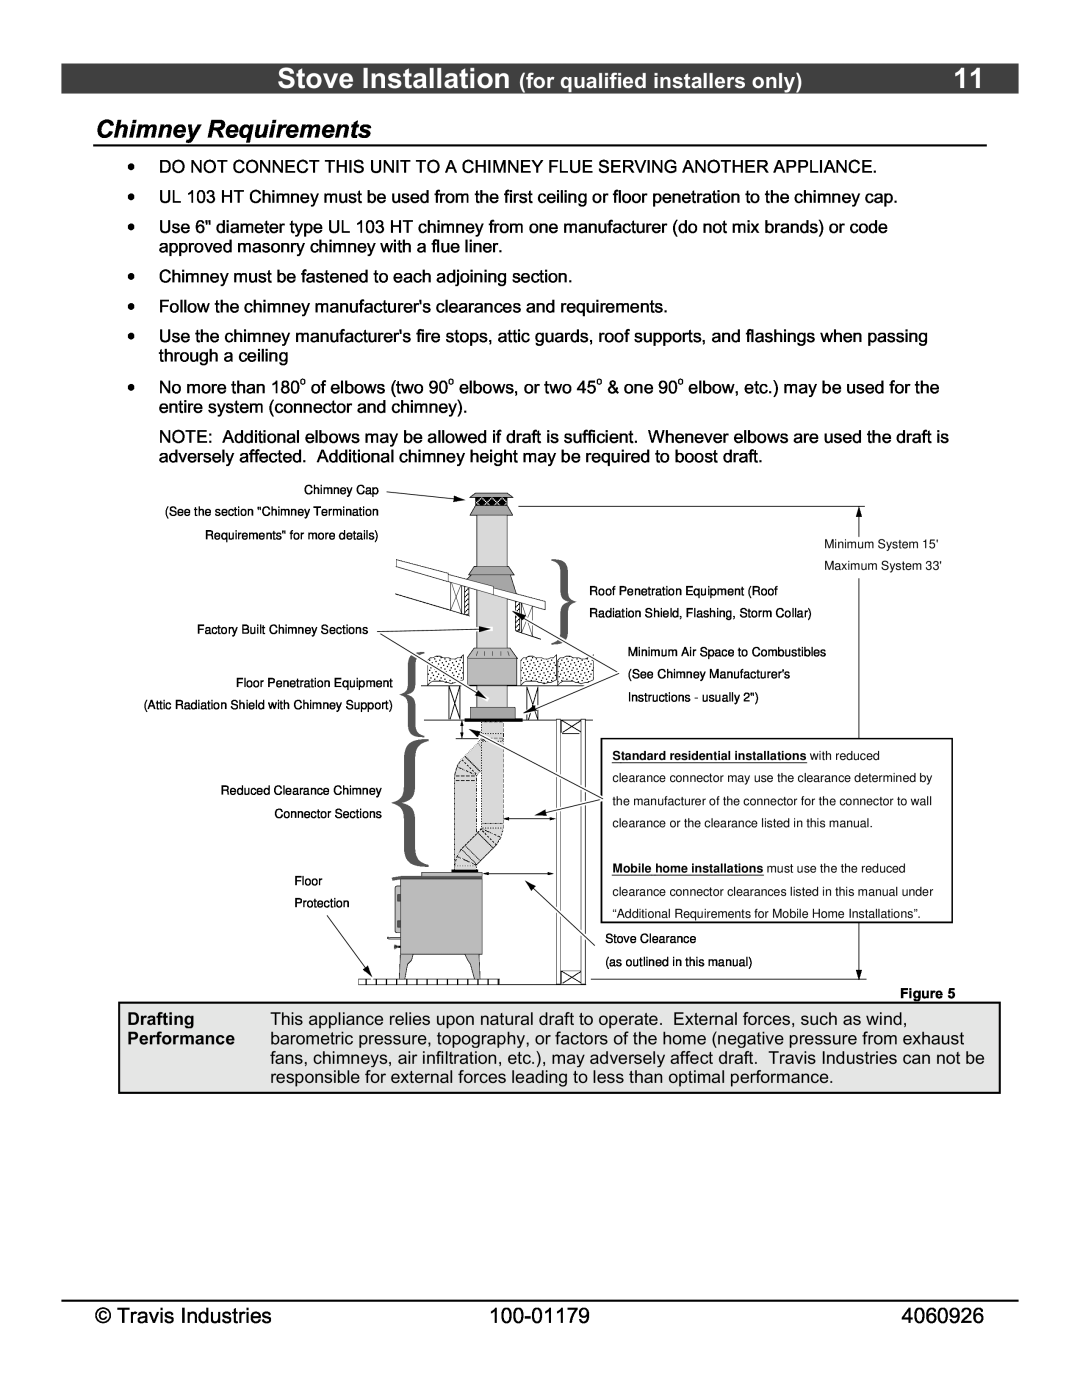 Lopi 1750 owner manual Chimney Requirements, Stove Installation for qualified installers only, Drafting, Performance 